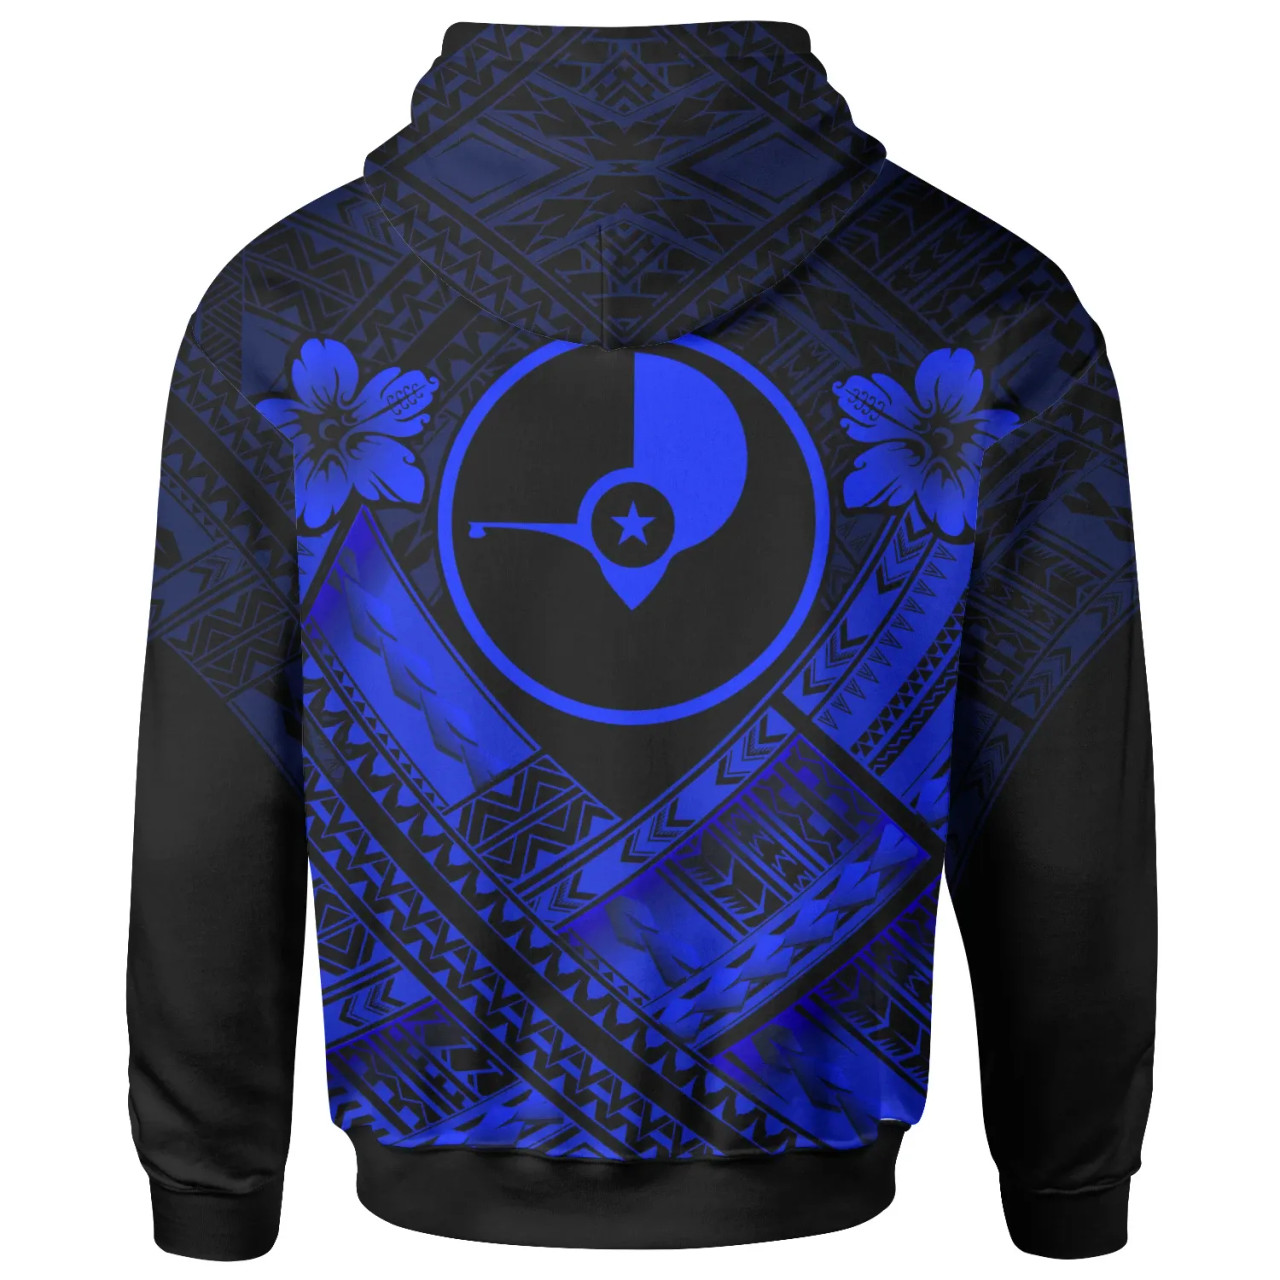 Yap Polynesian Hoodie - Yap Blue Seal Camisole Hibiscus Style